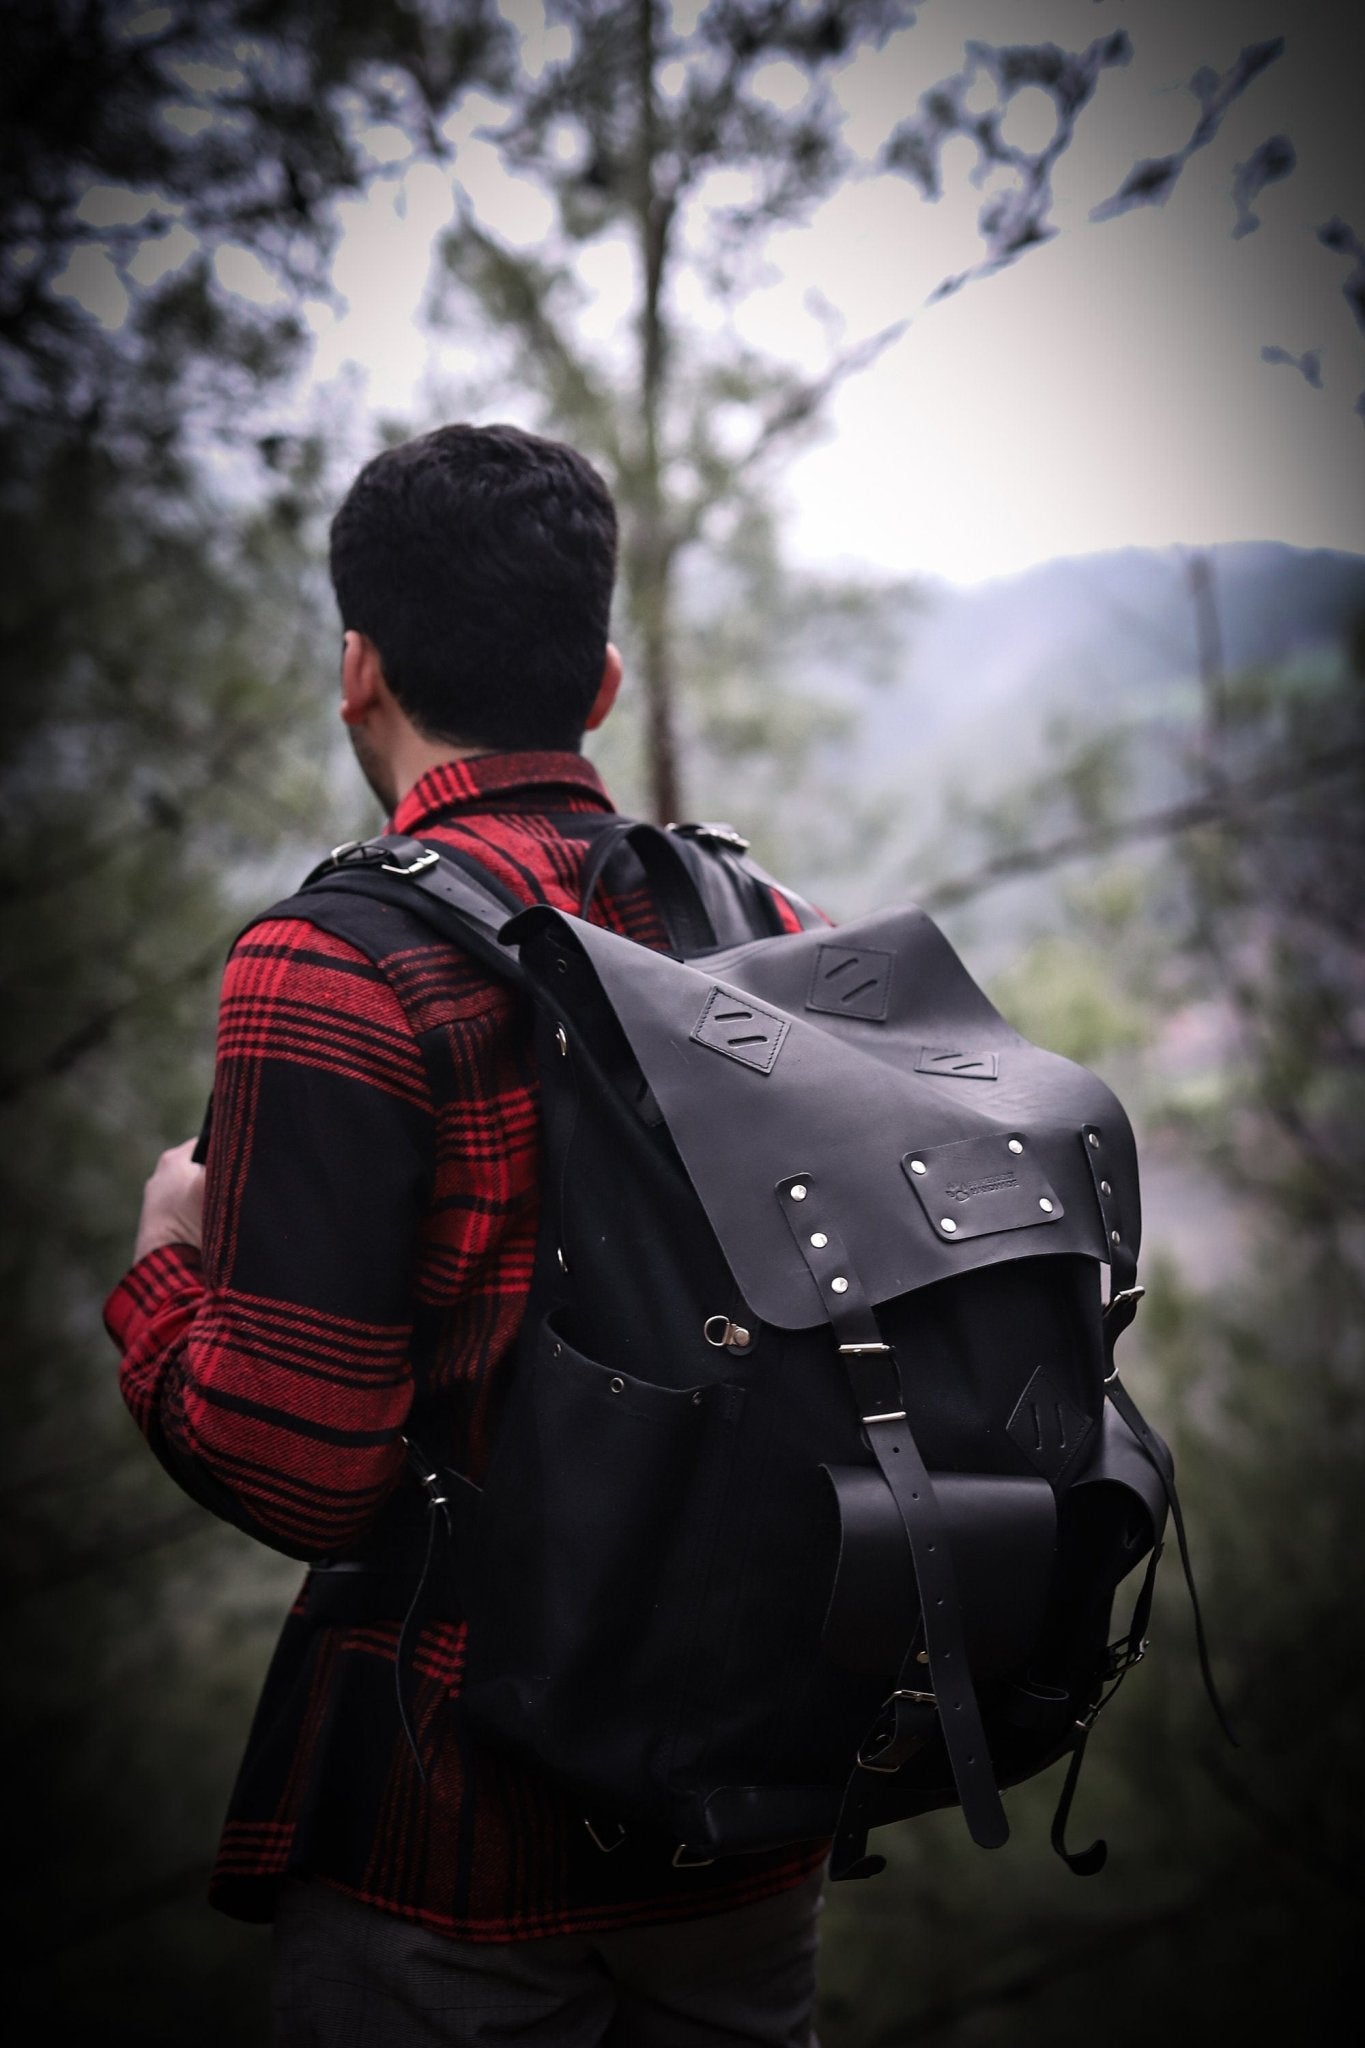 Limited Bestseller Custom Genuine Black Waxed Canvas with Leather Details Backpack for Travel, Camping | 60 Liters | Personalization  99percenthandmade   